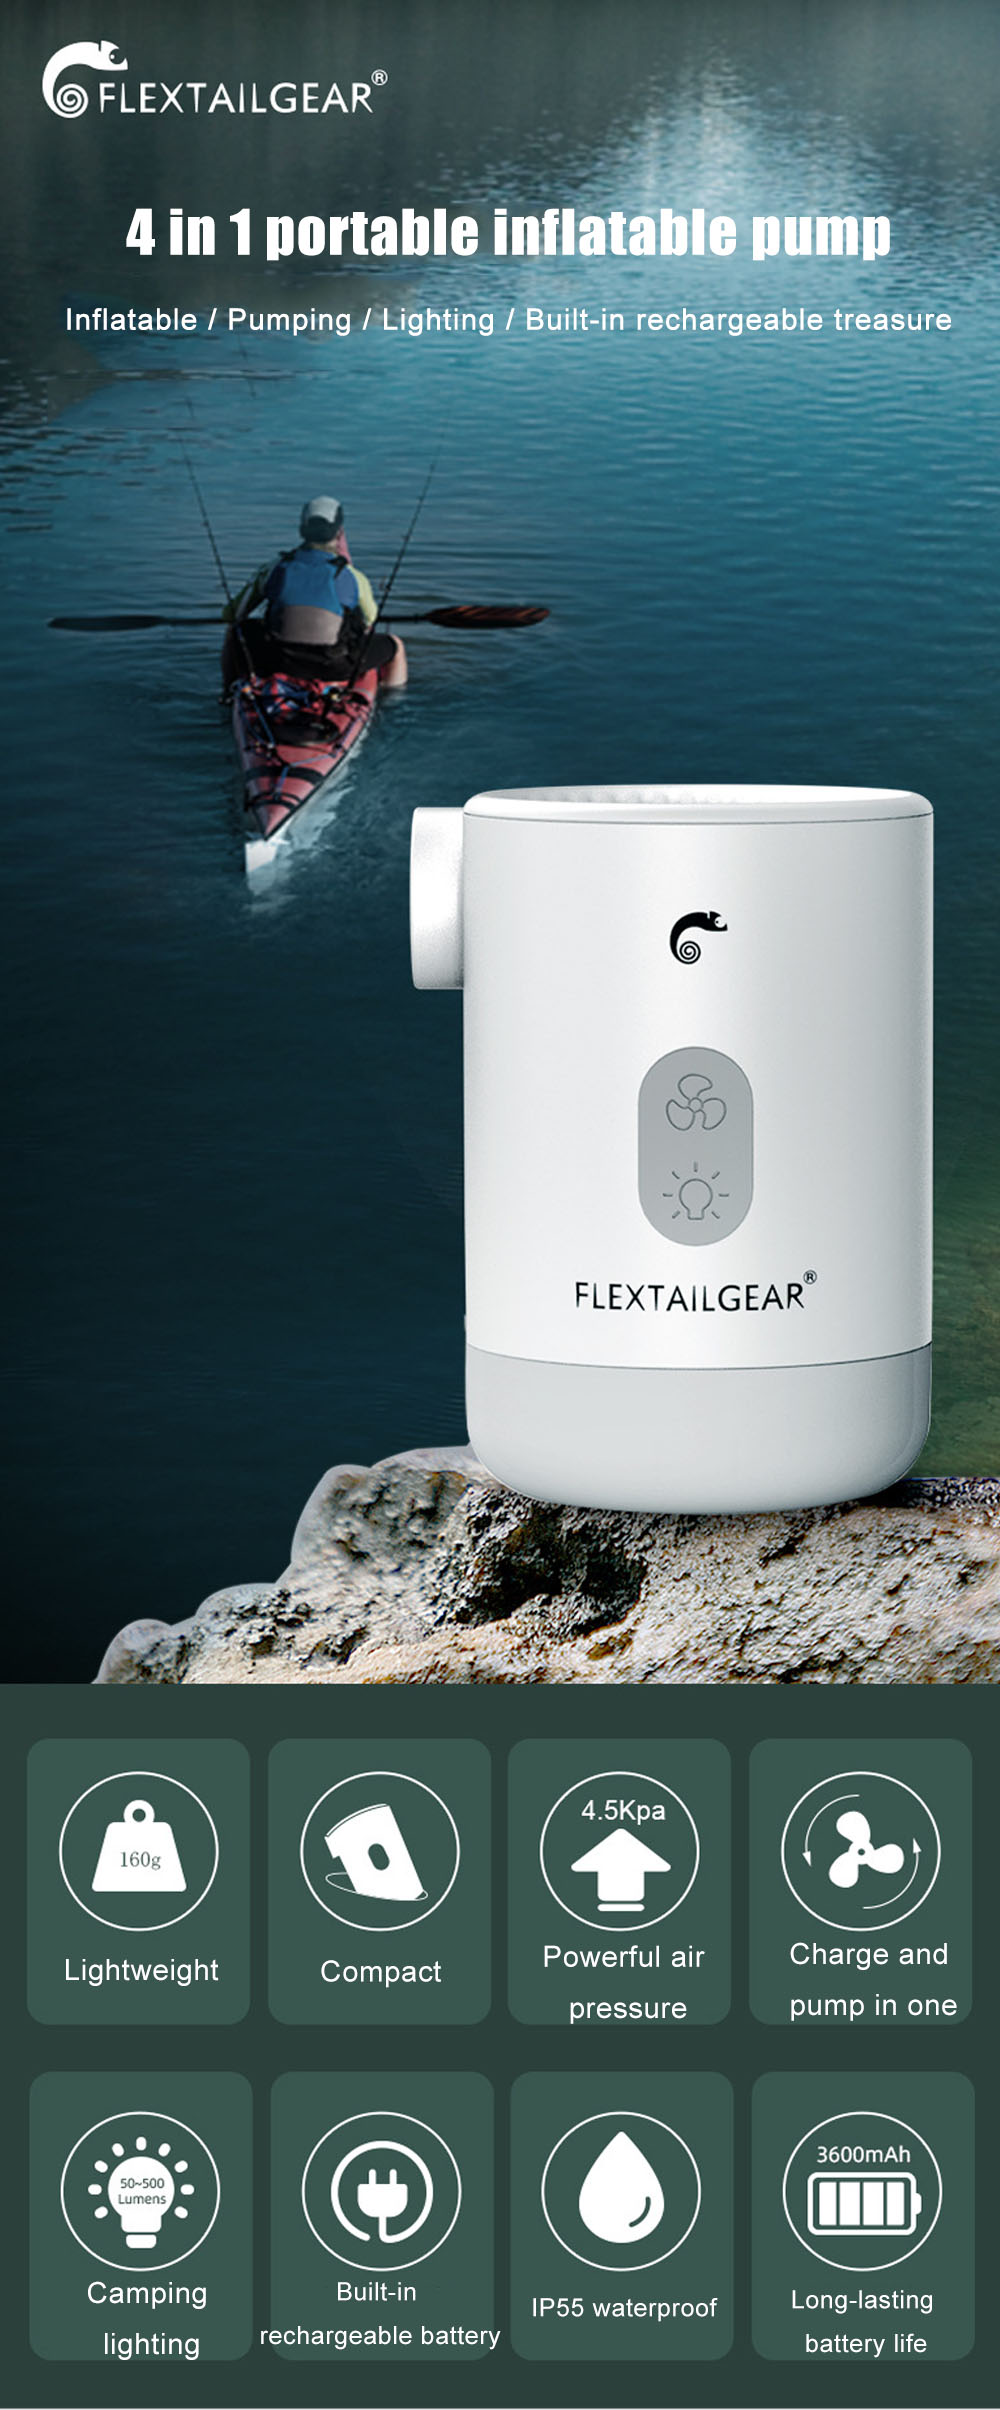 FLEXTAILGEAR-3600mAh-4-in-1-Portable-Inflatable-Pump-Lighting-Built-in-Rechargeable-Waterproof-Campi-1895559-1